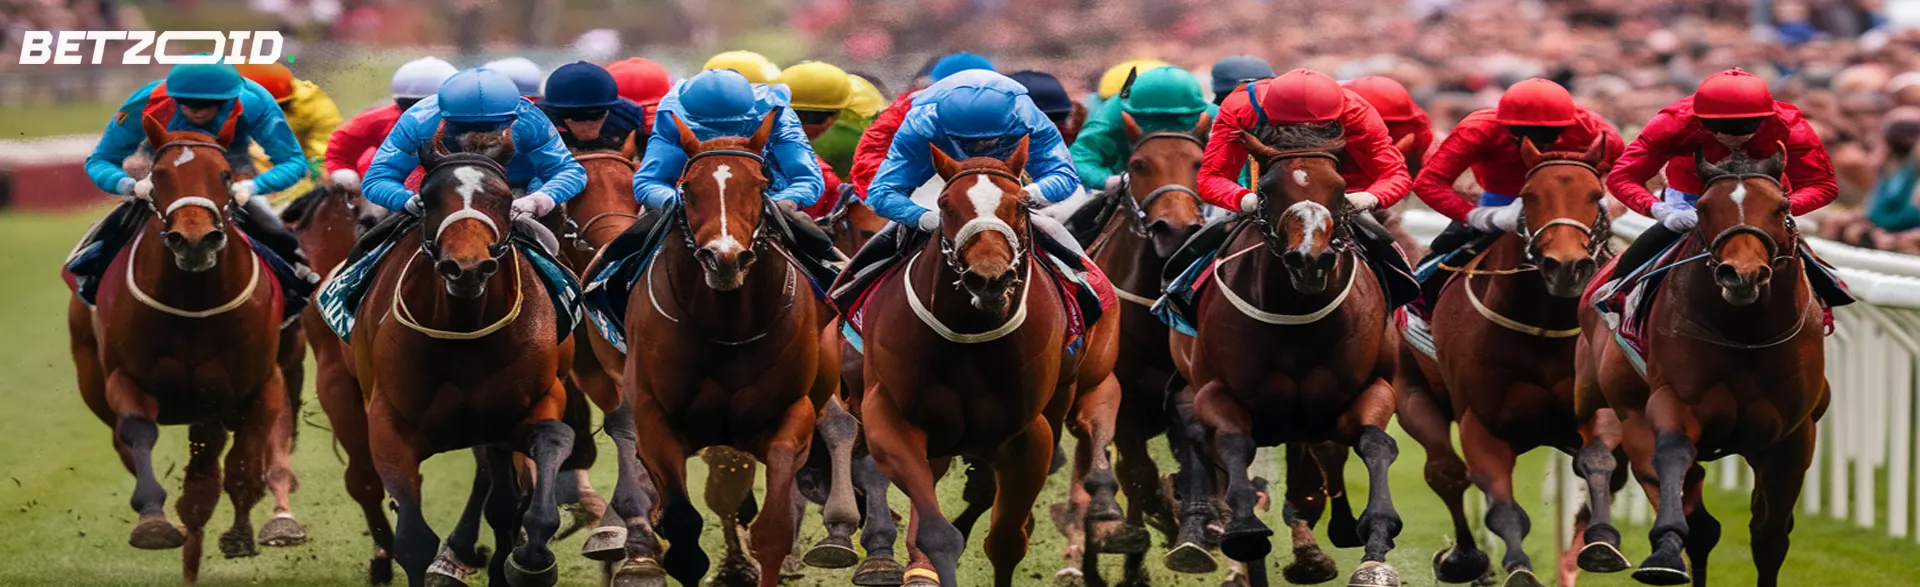 Best Horse Racing Events in Australia to Bet on.